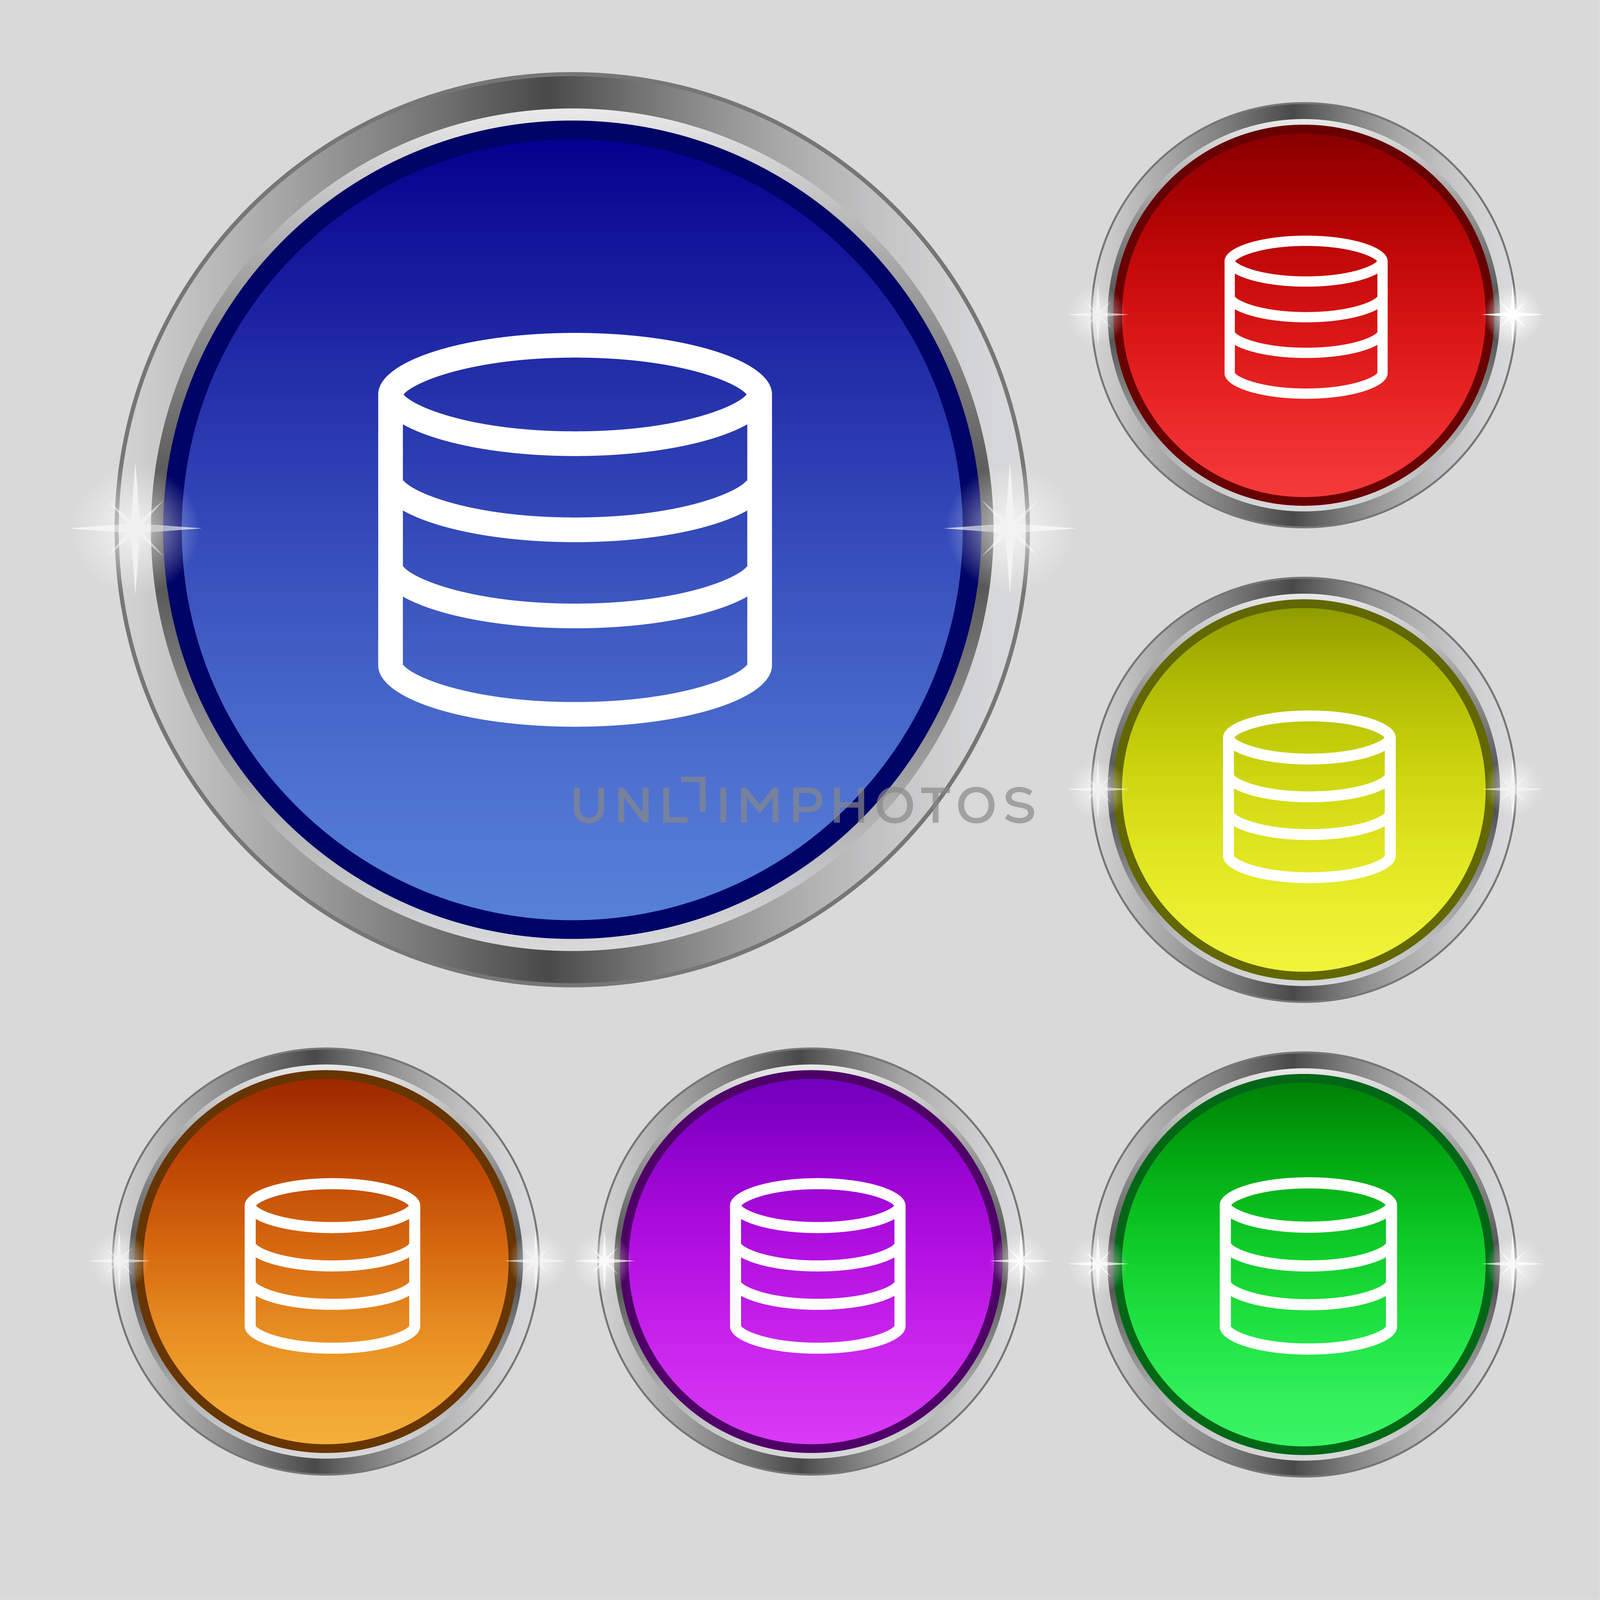 Hard disk and database icon sign. Round symbol on bright colourful buttons. illustration